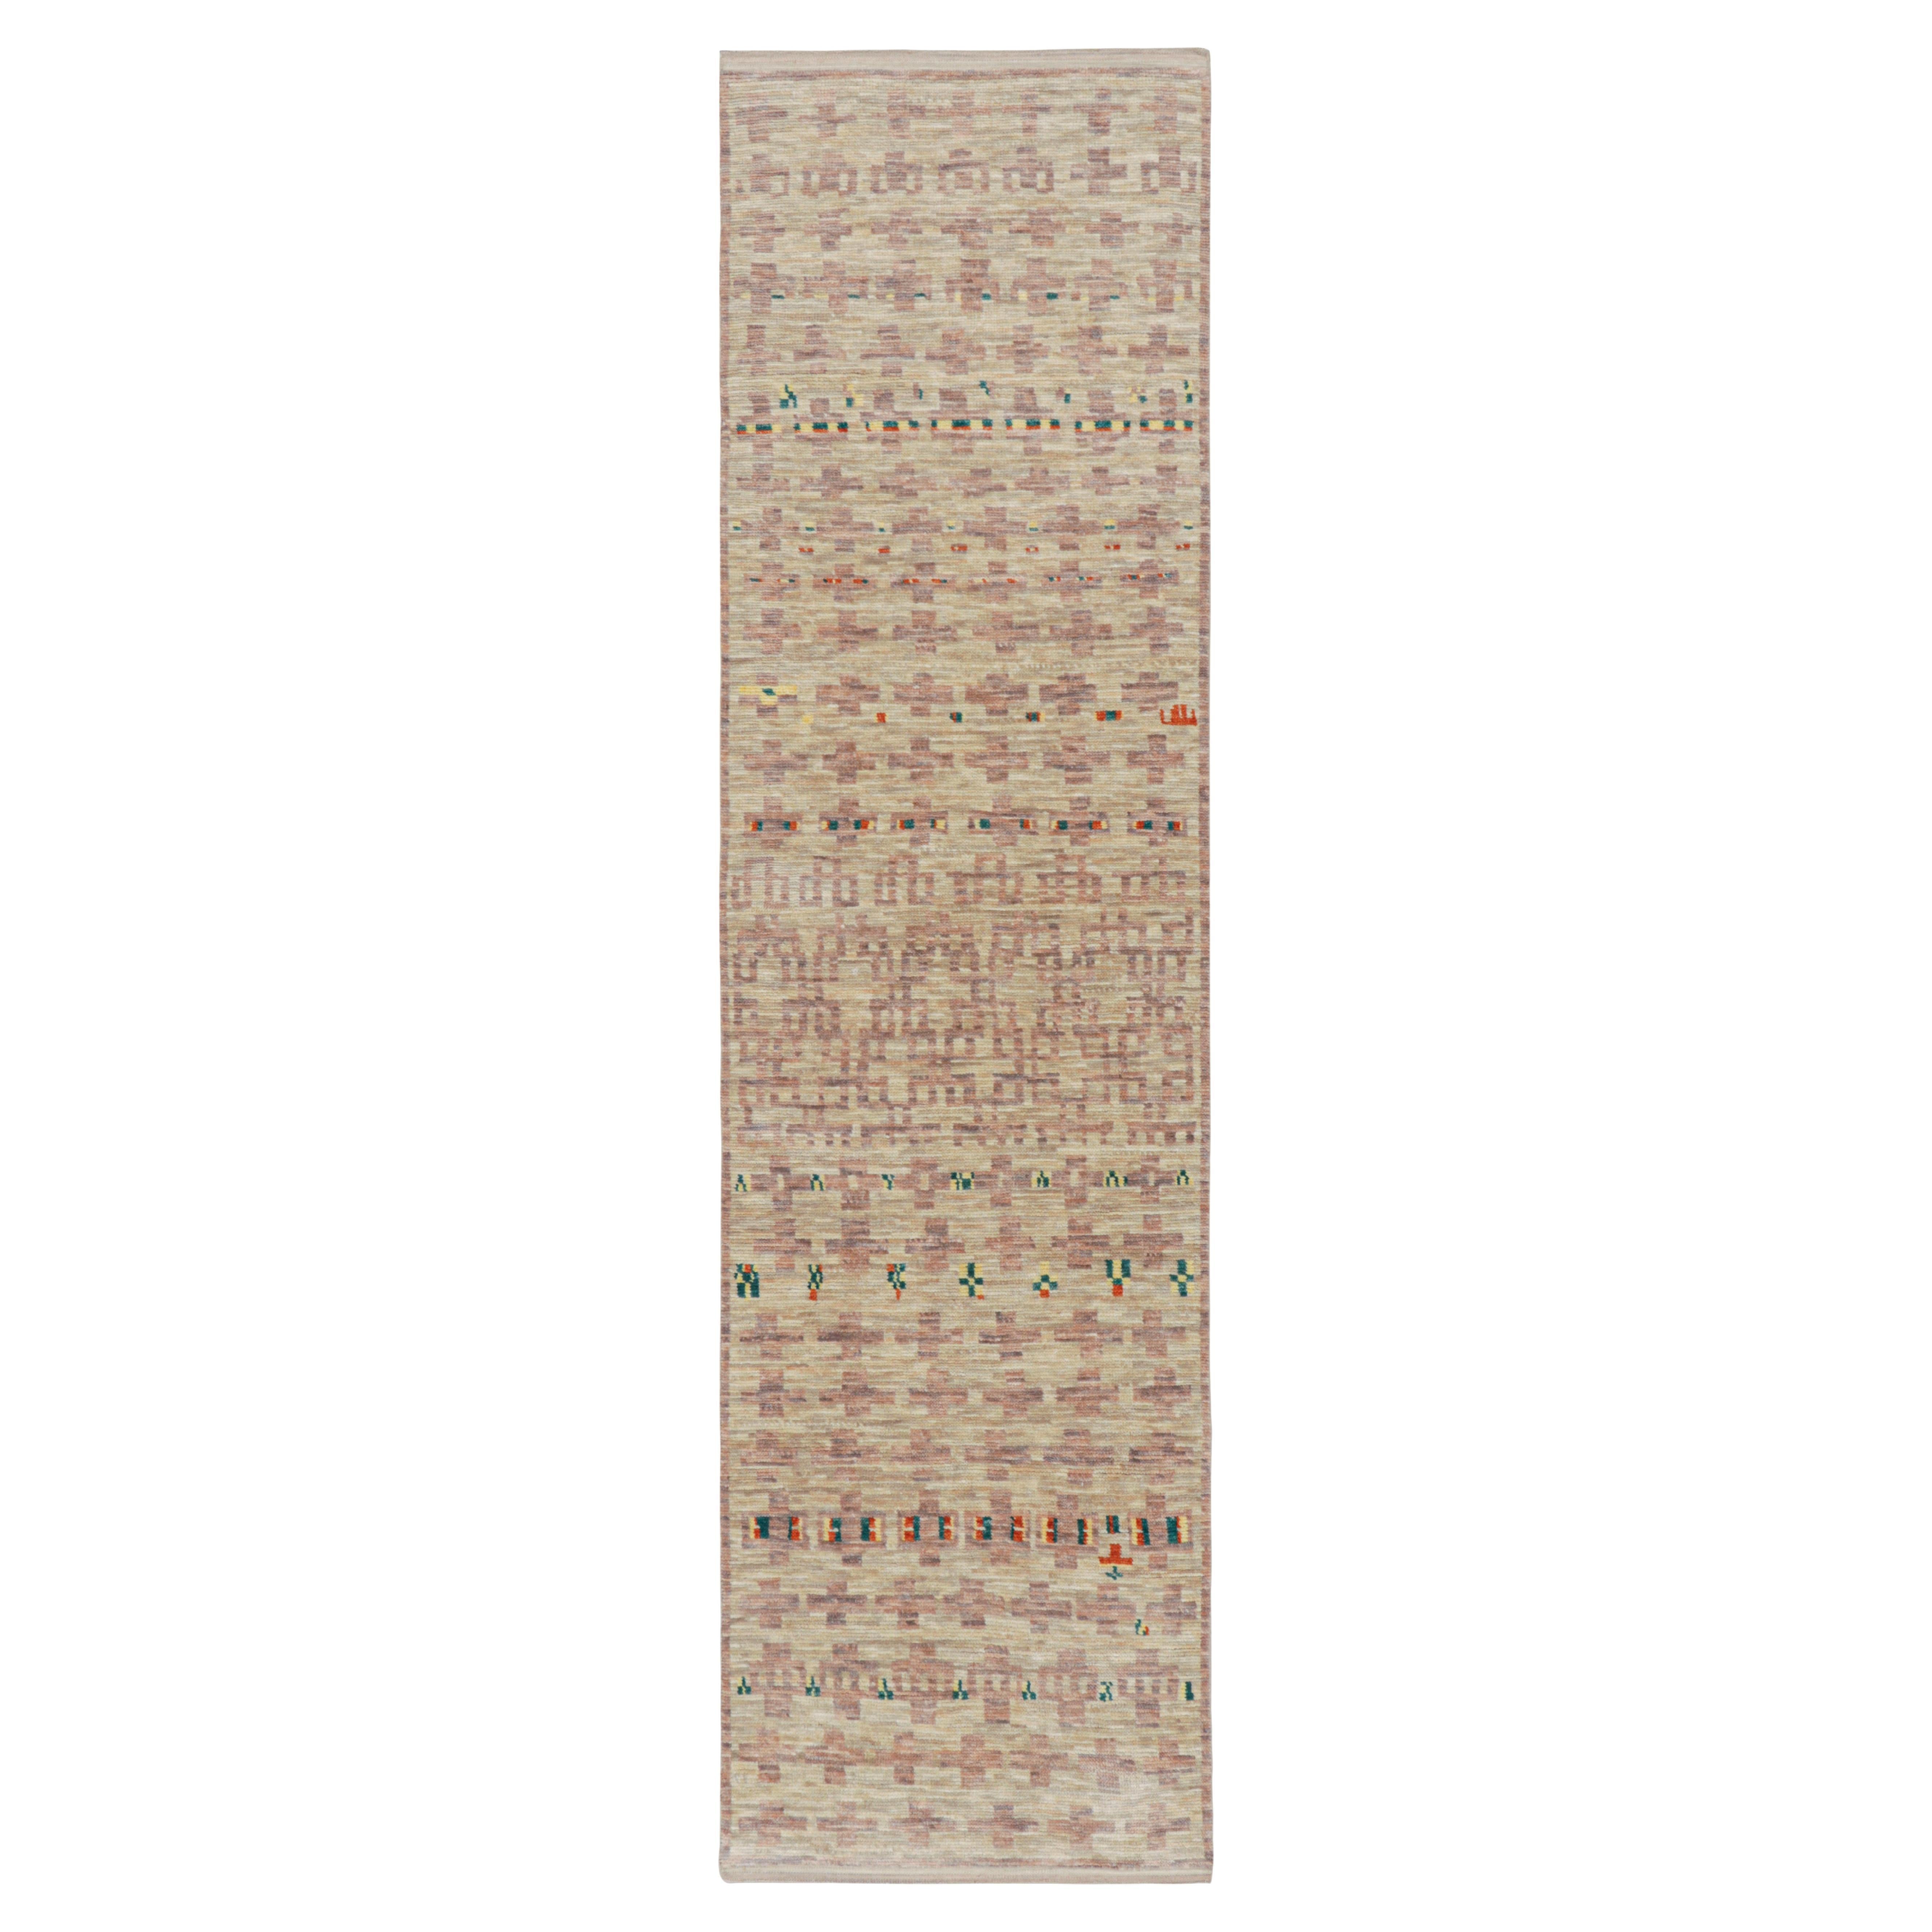 Rug & Kilim’s Moroccan Style Runner Rug in Beige with Geometric Pattern